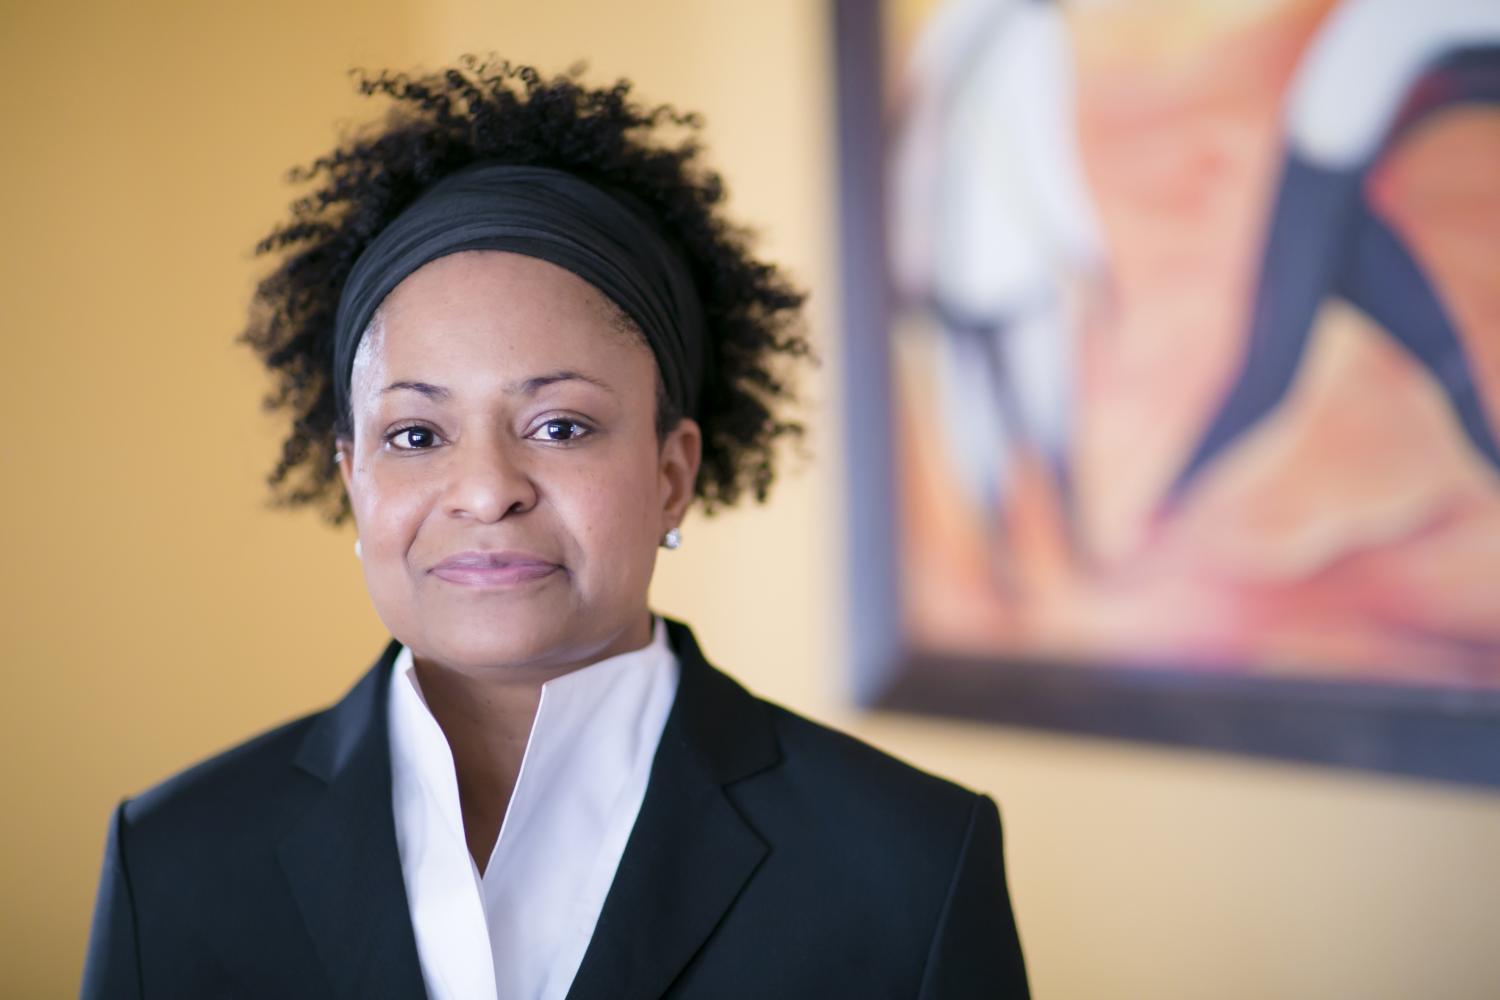 President Andrew Hamilton names Lisa Coleman as the universitys first Chief Diversity Officer. Coleman was previously the Chief Diversity Officer at Harvard.